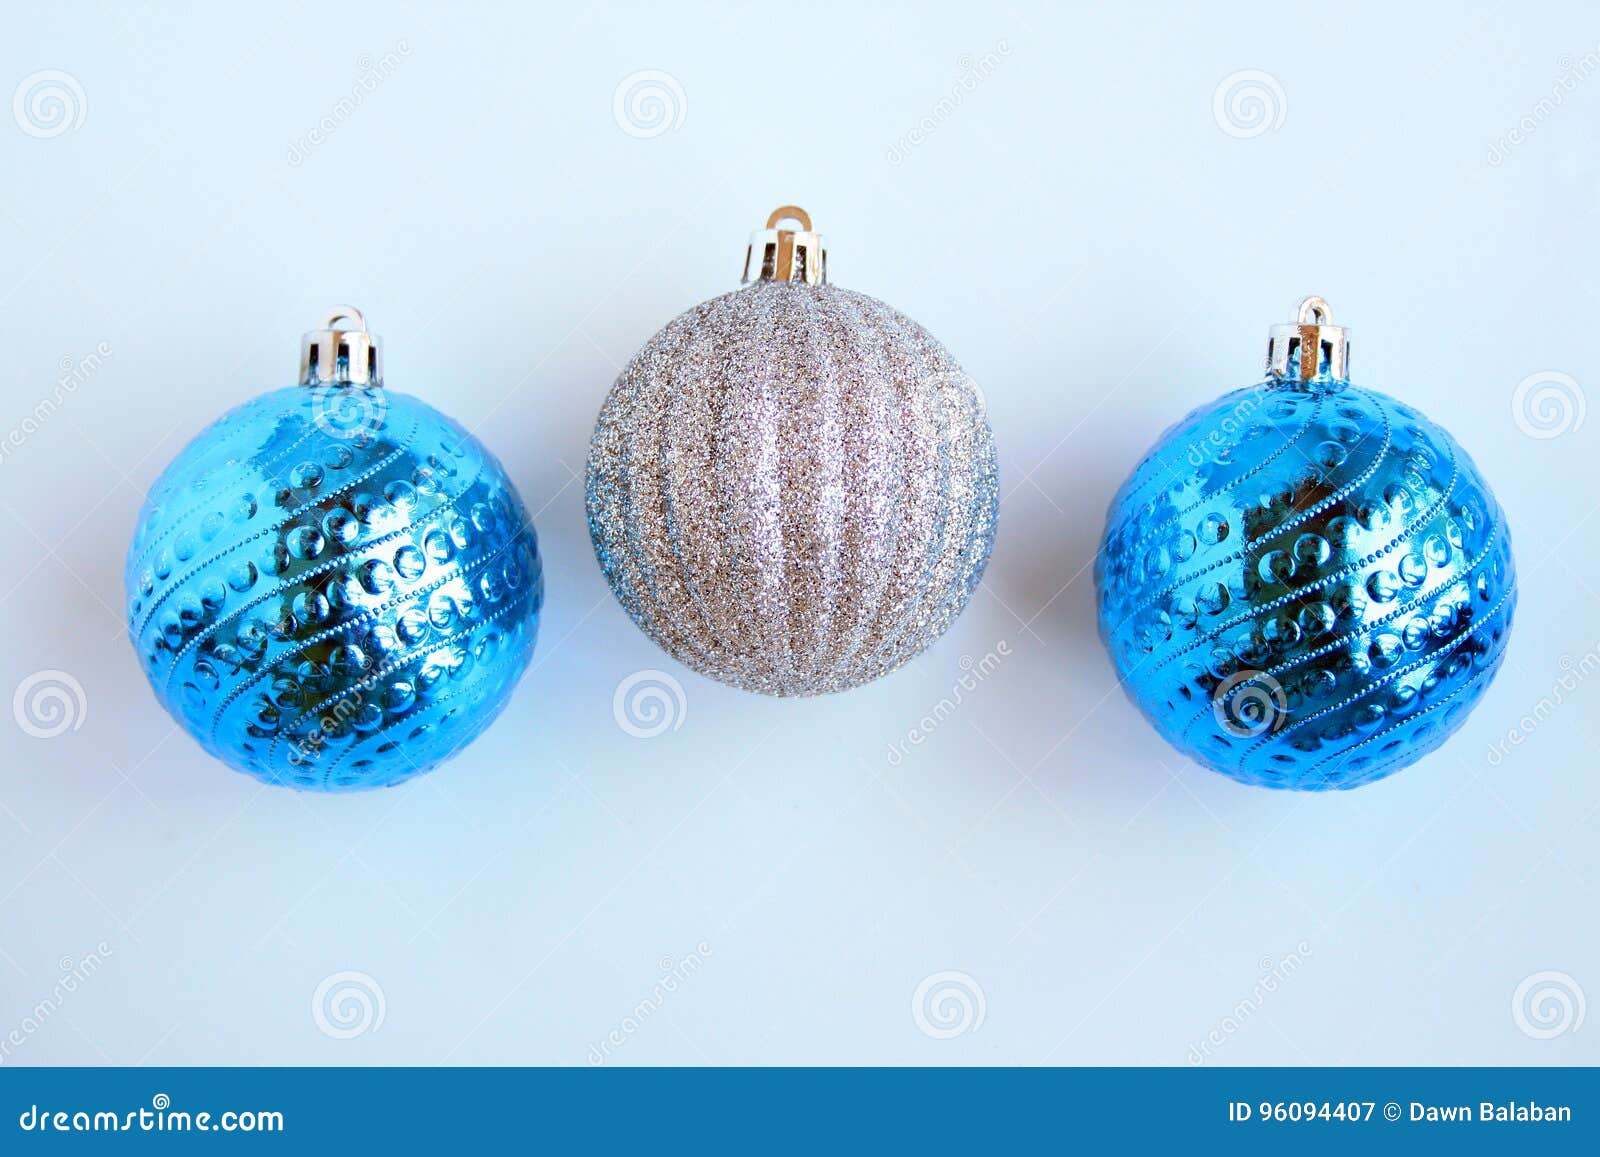 Three Silver and Blue Christmas Balls Stock Image - Image of pretty ...